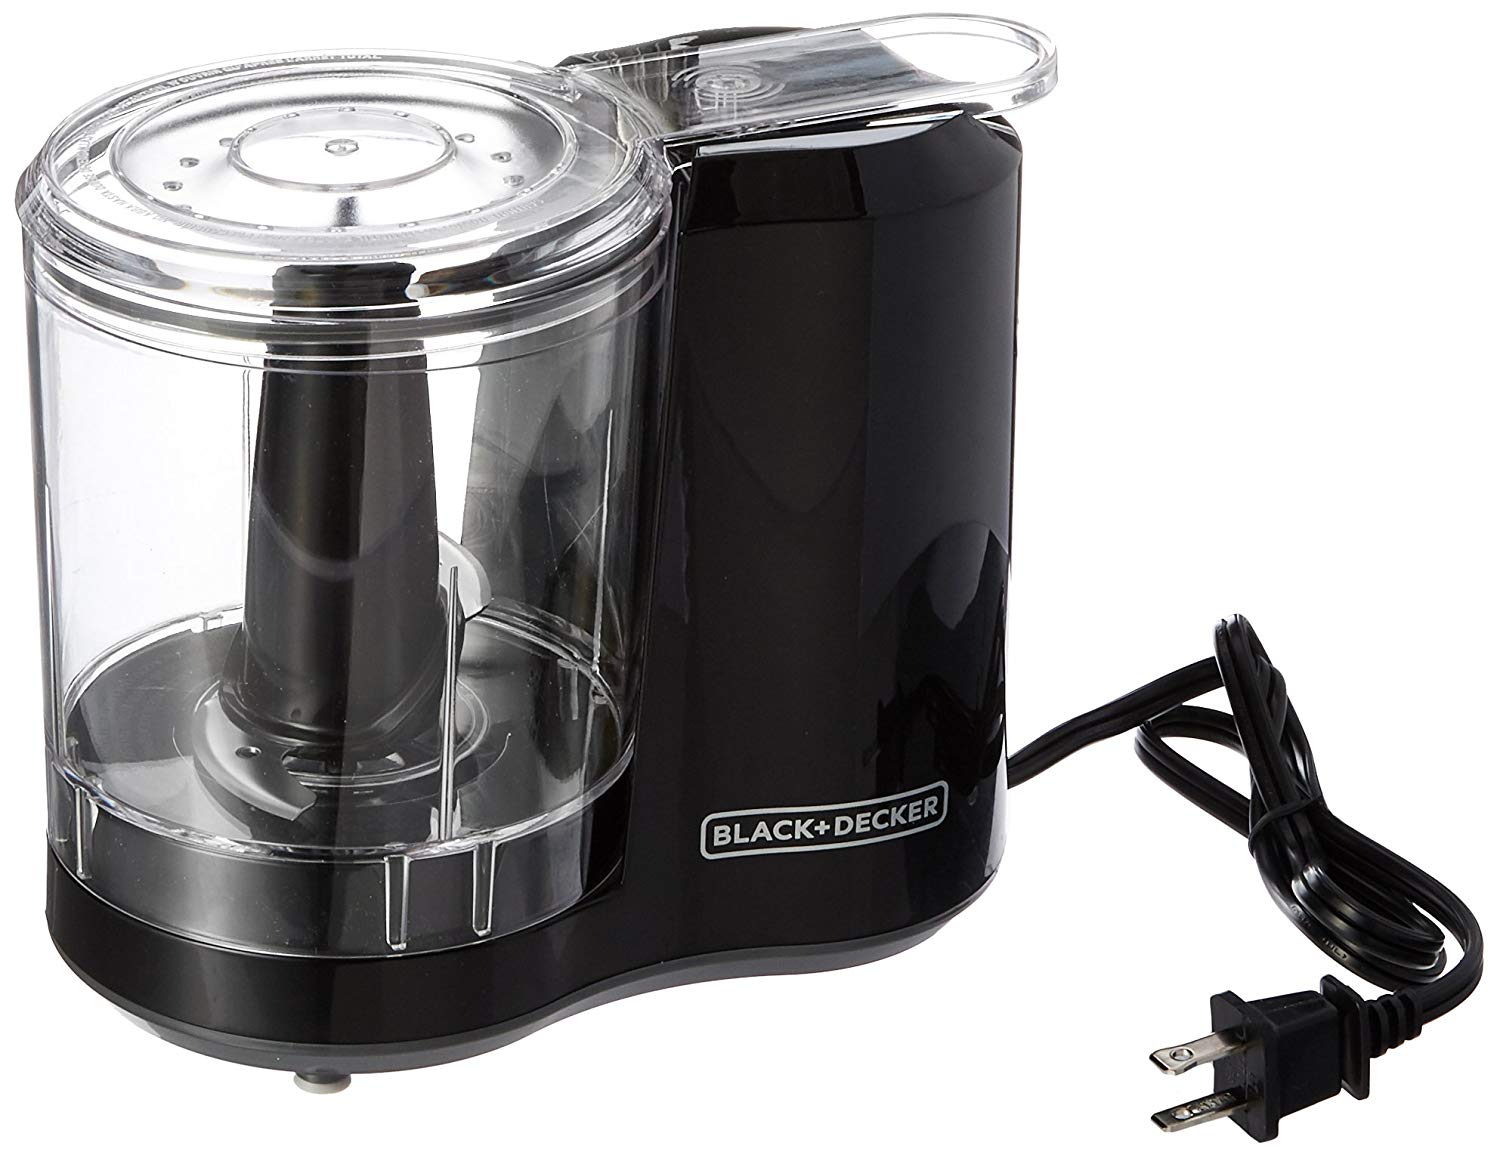 Zyliss Easy Pull Food Chopper matching all-time low at $19 Prime